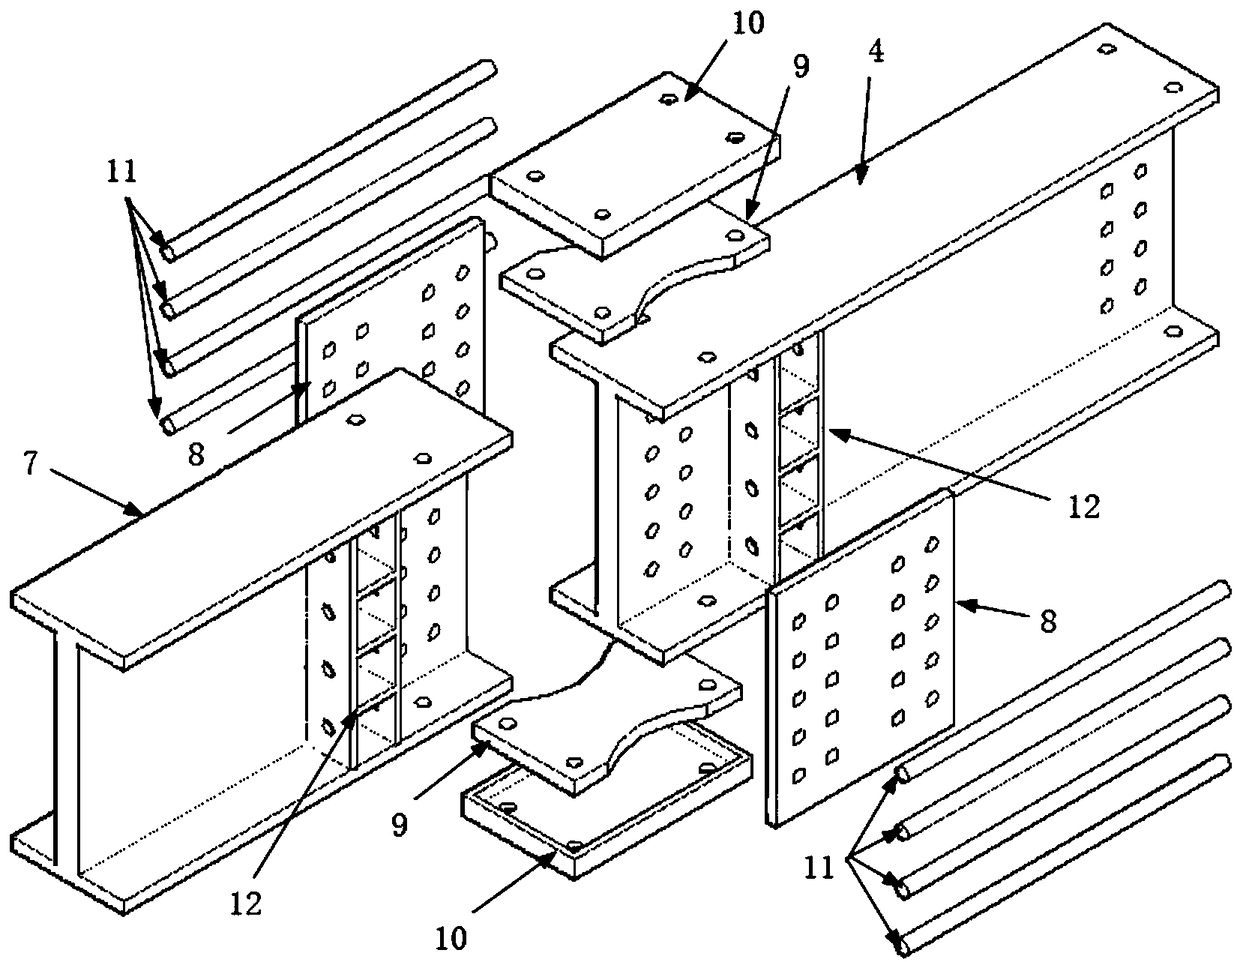 Assembling multi-section beam steel frame capable of self-centering after earthquake